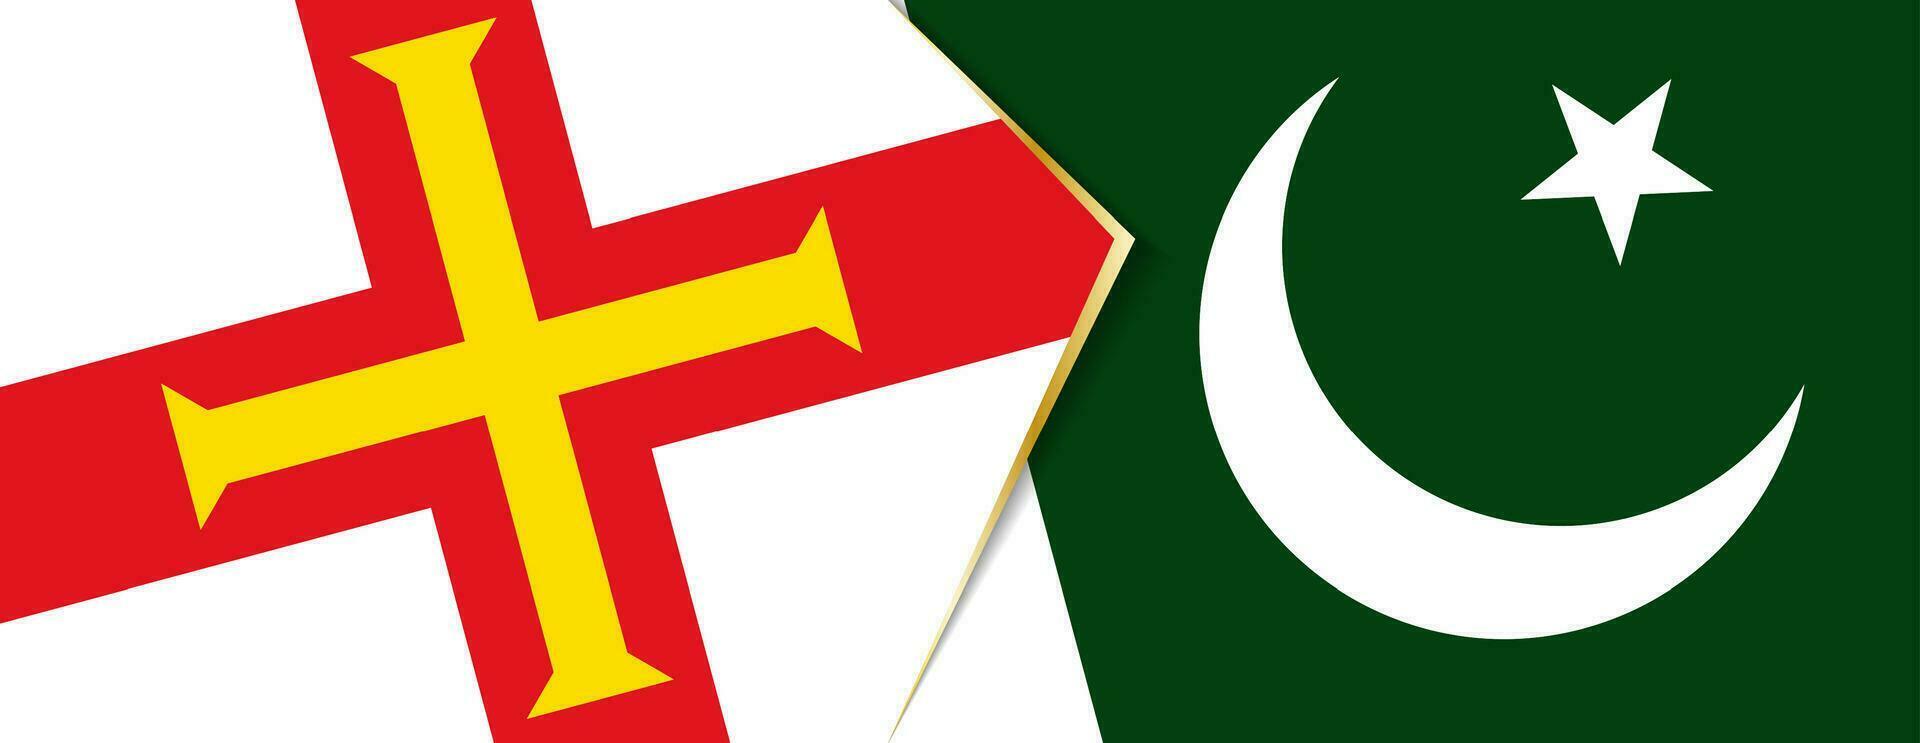 Guernsey and Pakistan flags, two vector flags.